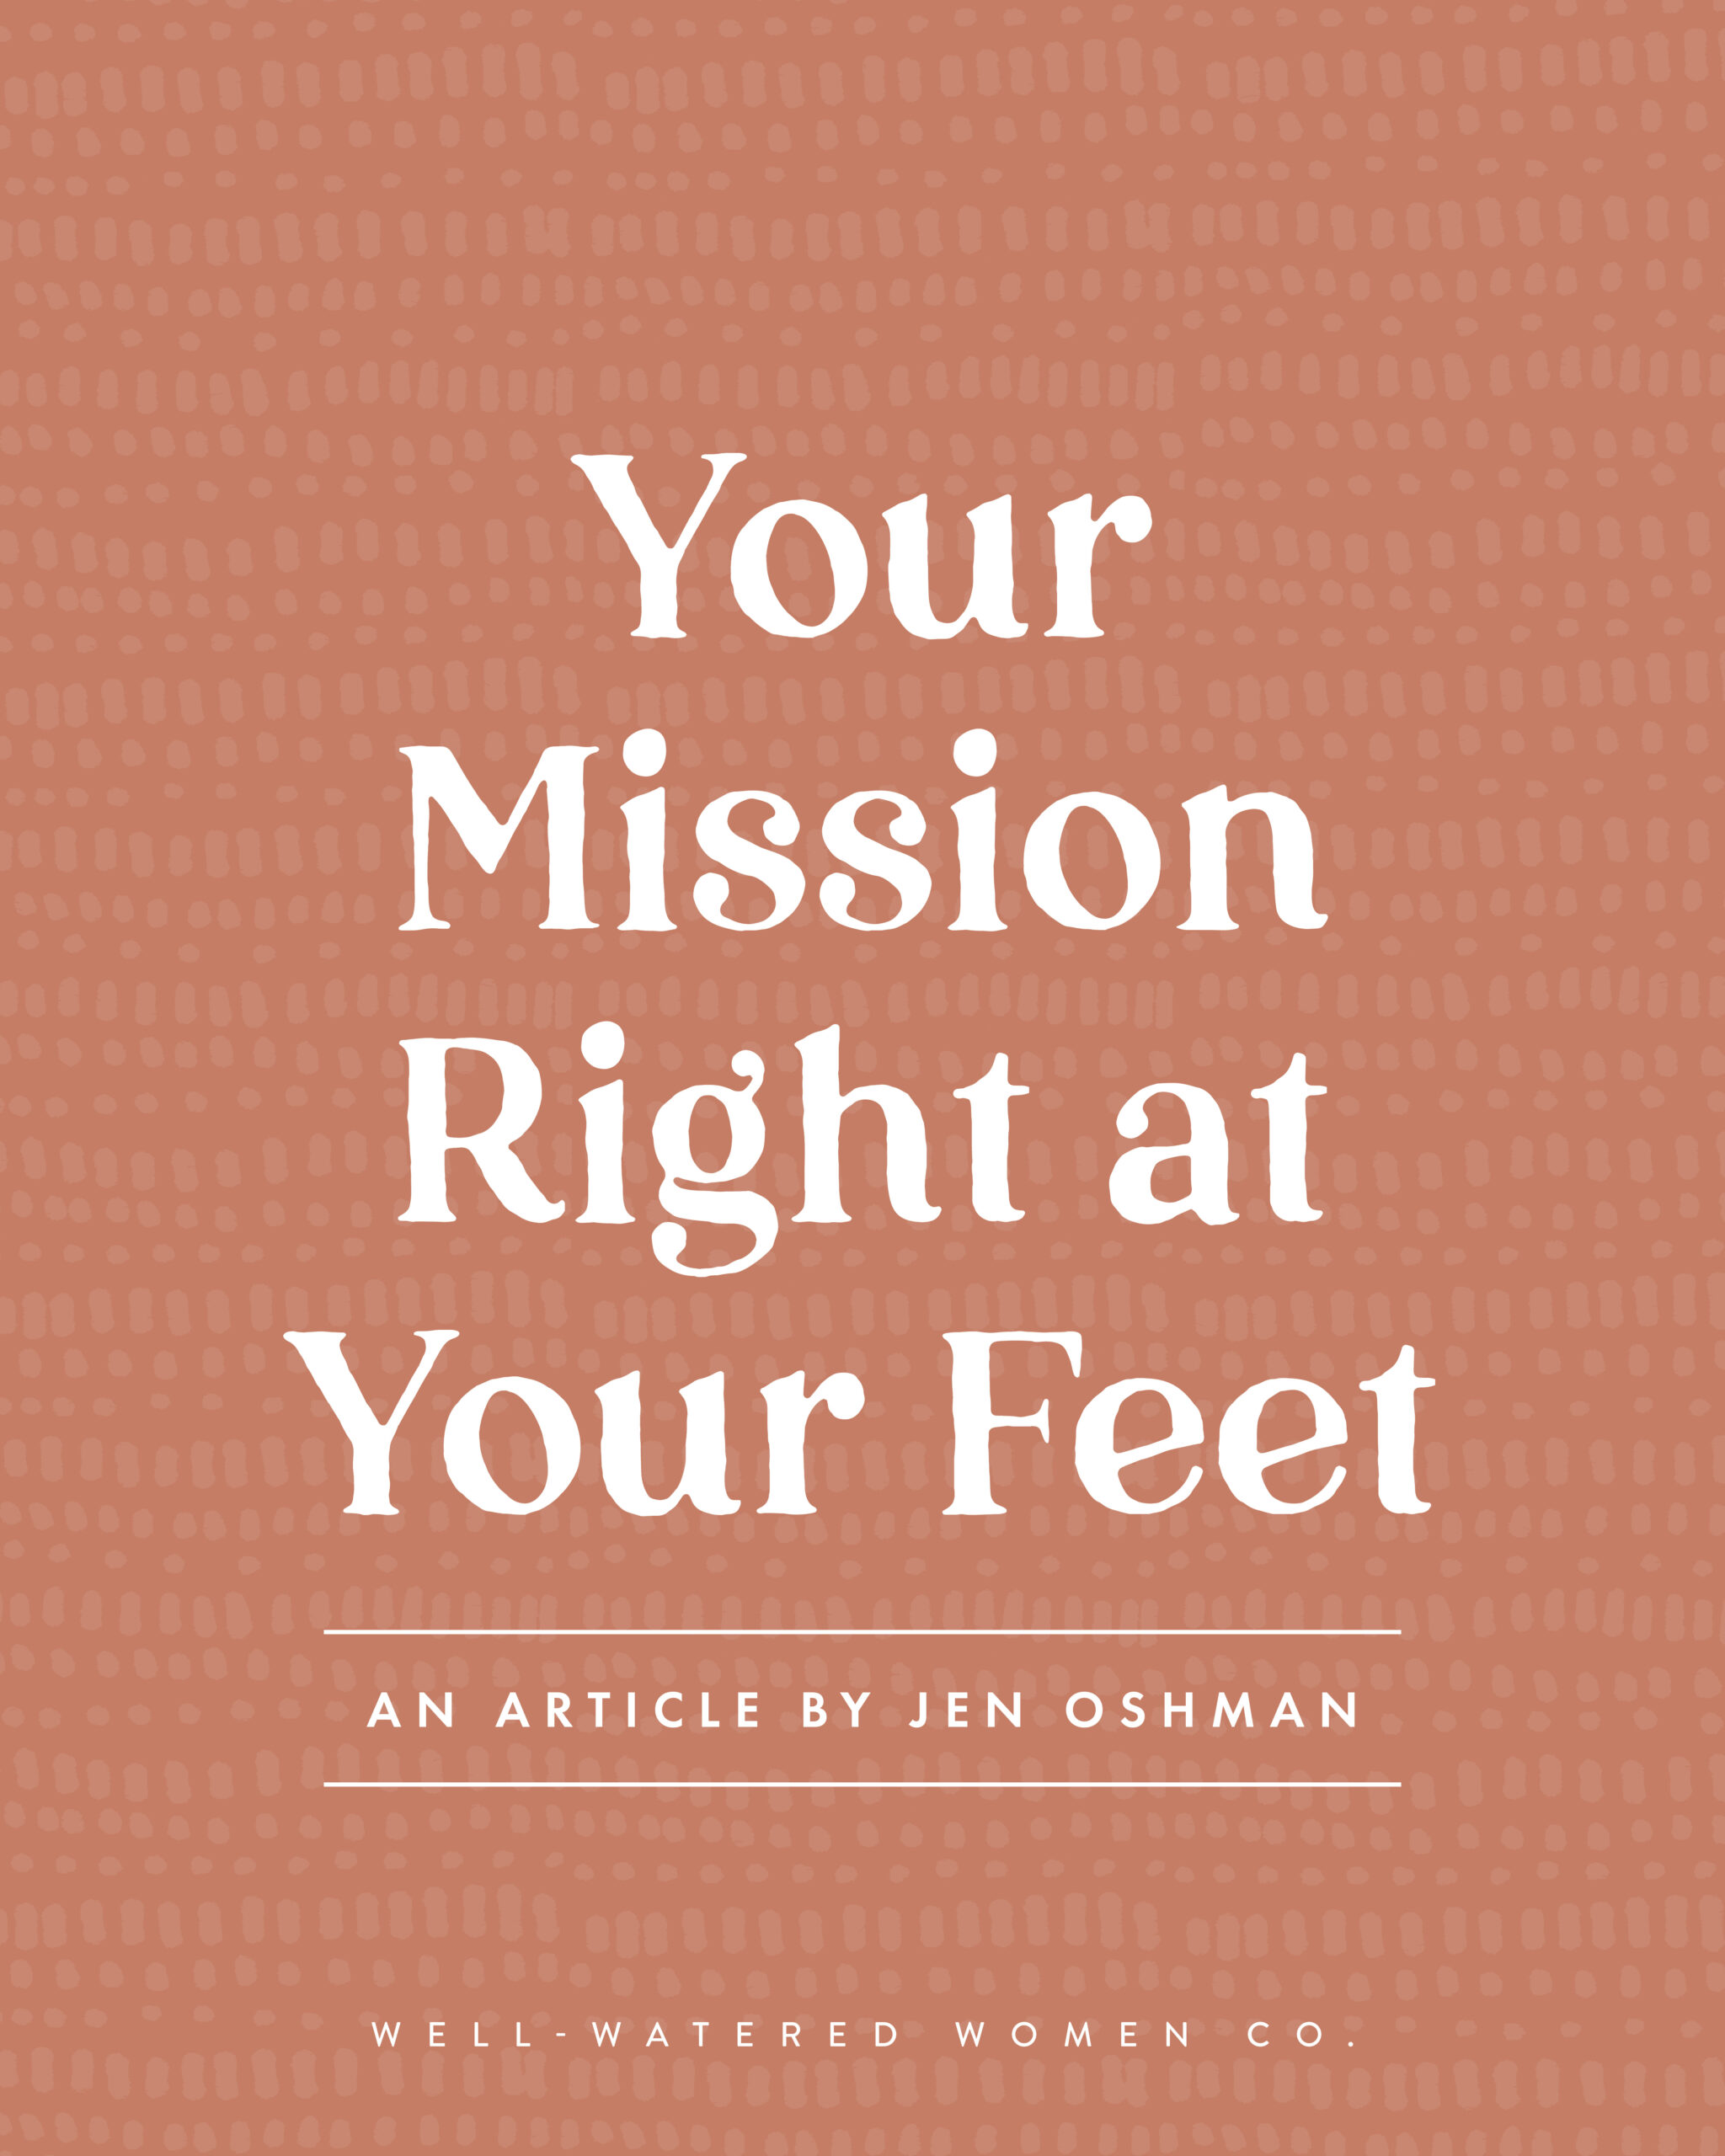 Your Mission Right at Your Feet - an article from Well-Watered Women